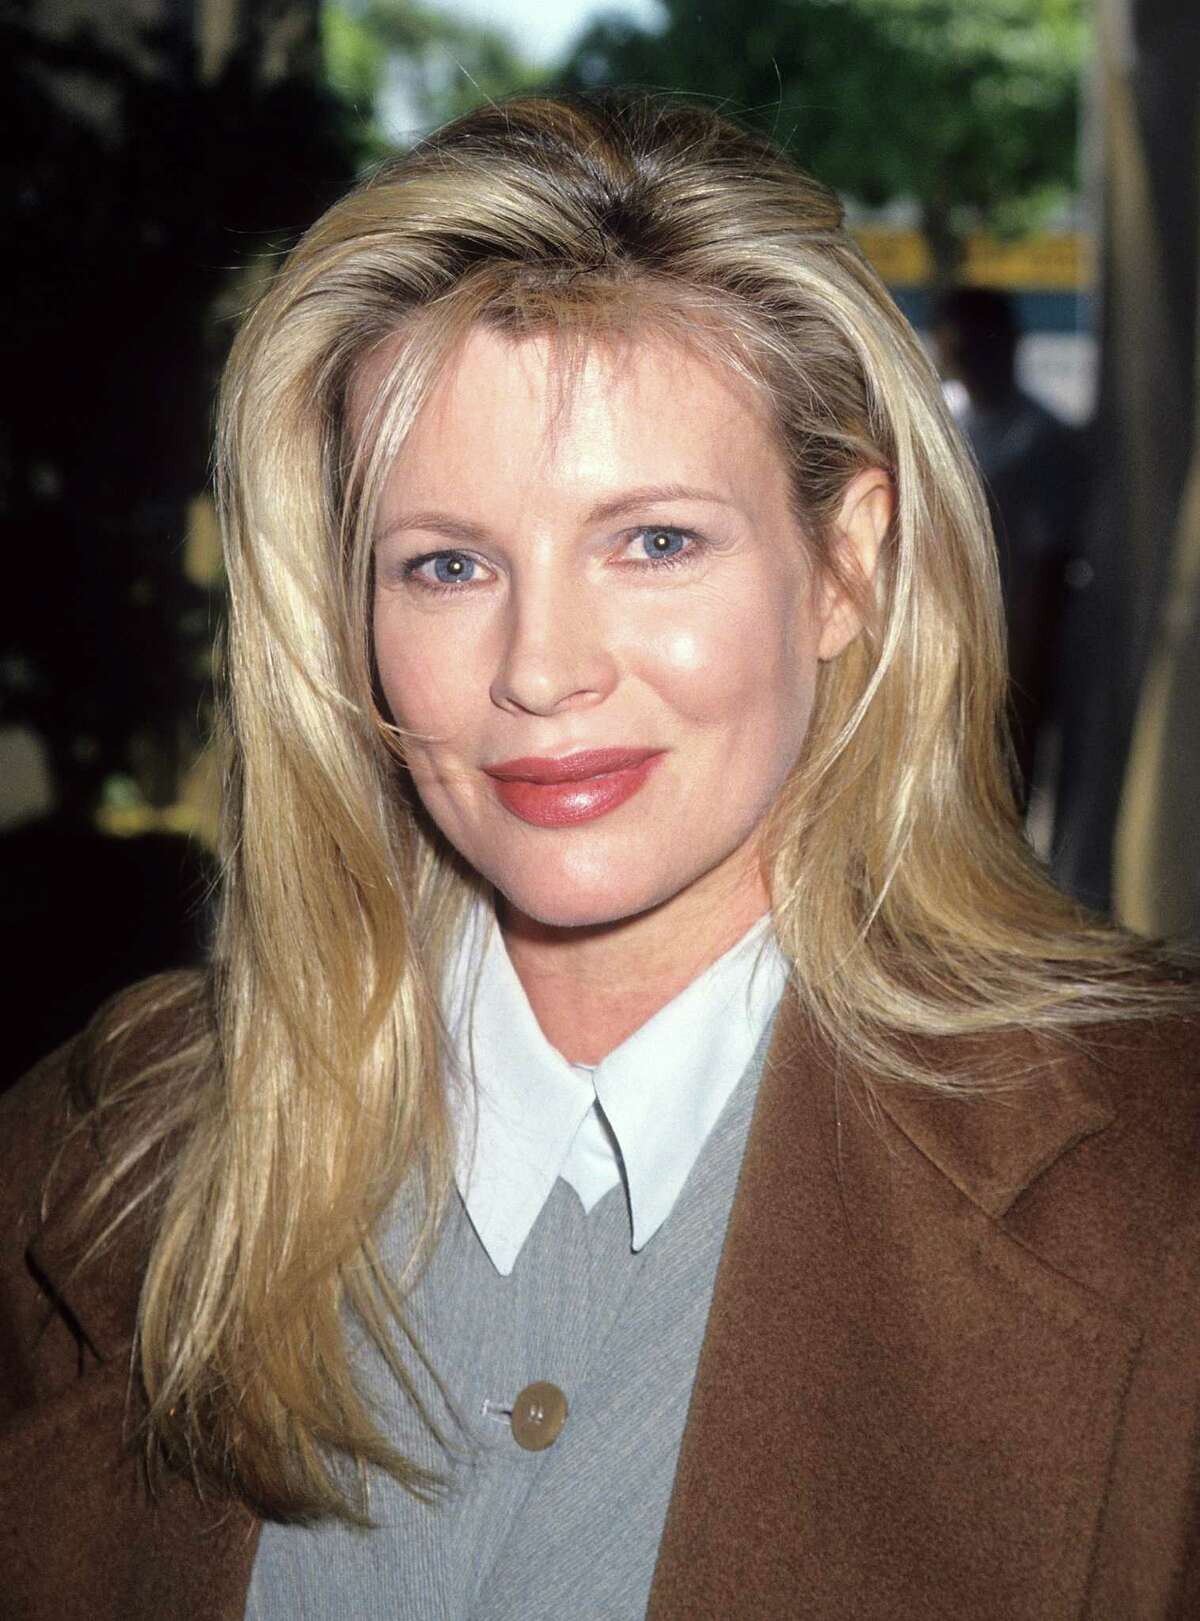 Kim Basinger turns 62 Then and now